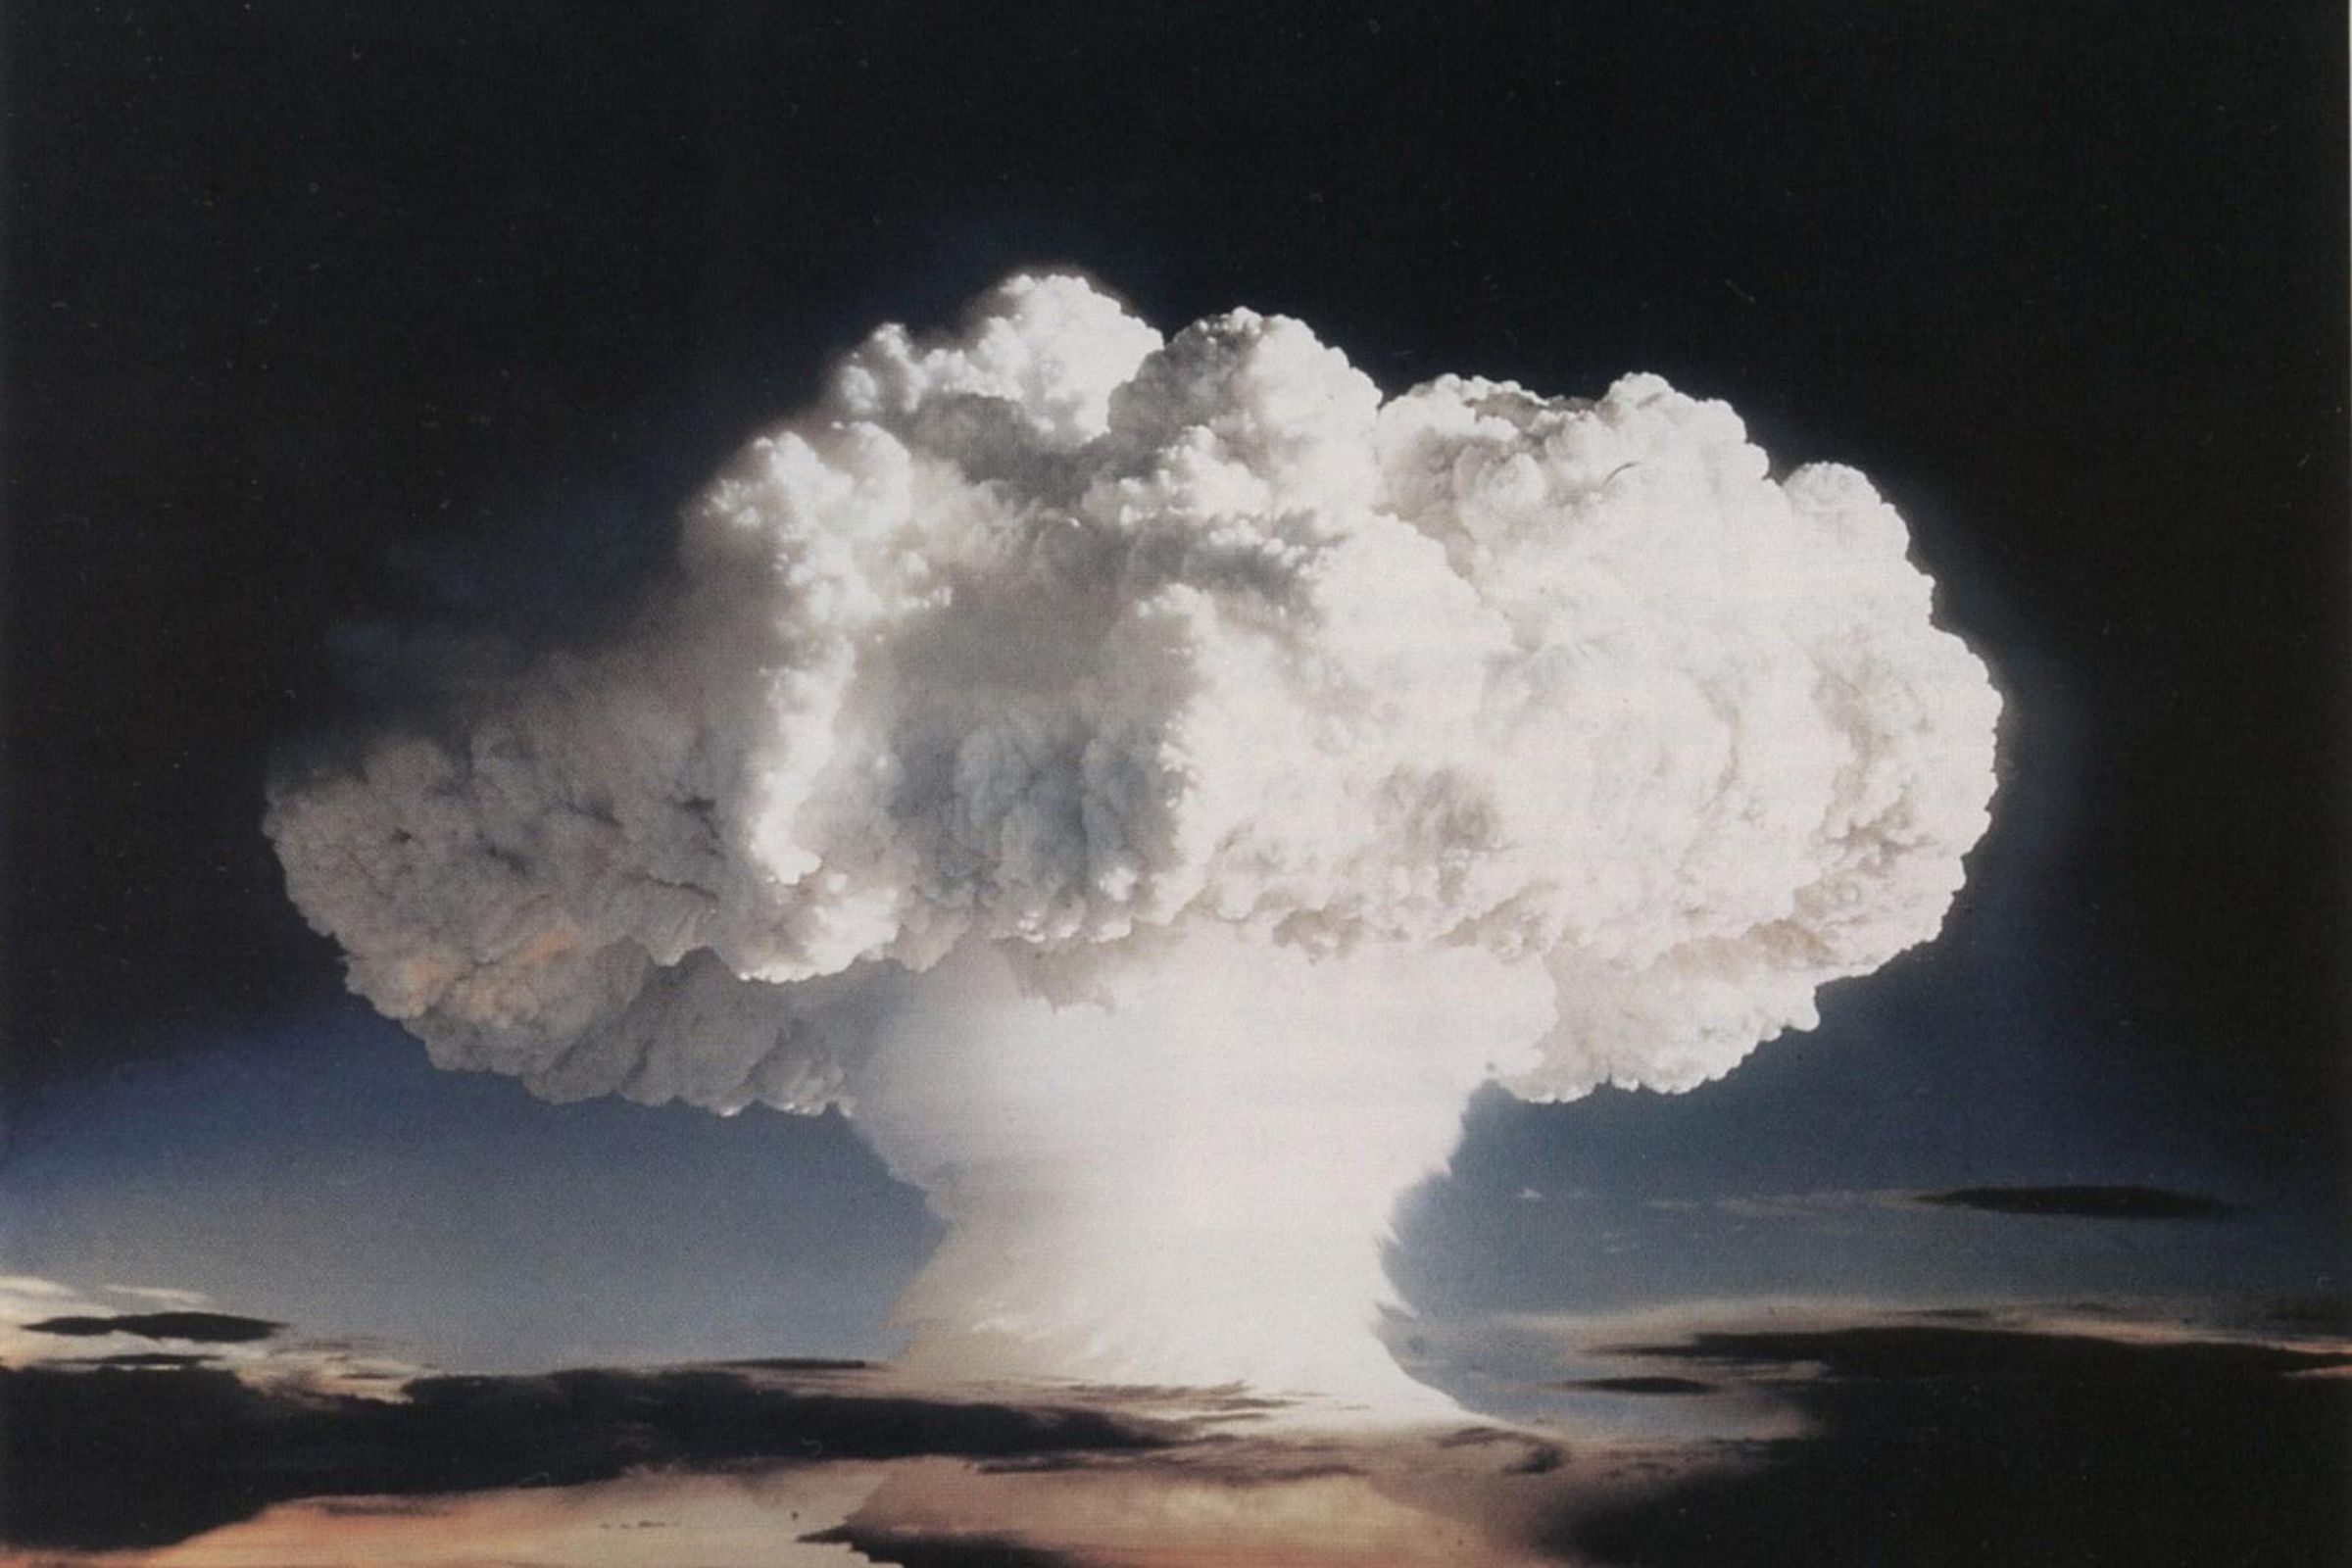 The mushroom cloud from the first successful test of the hydrogen bomb on Enewetak Atoll, 1952.